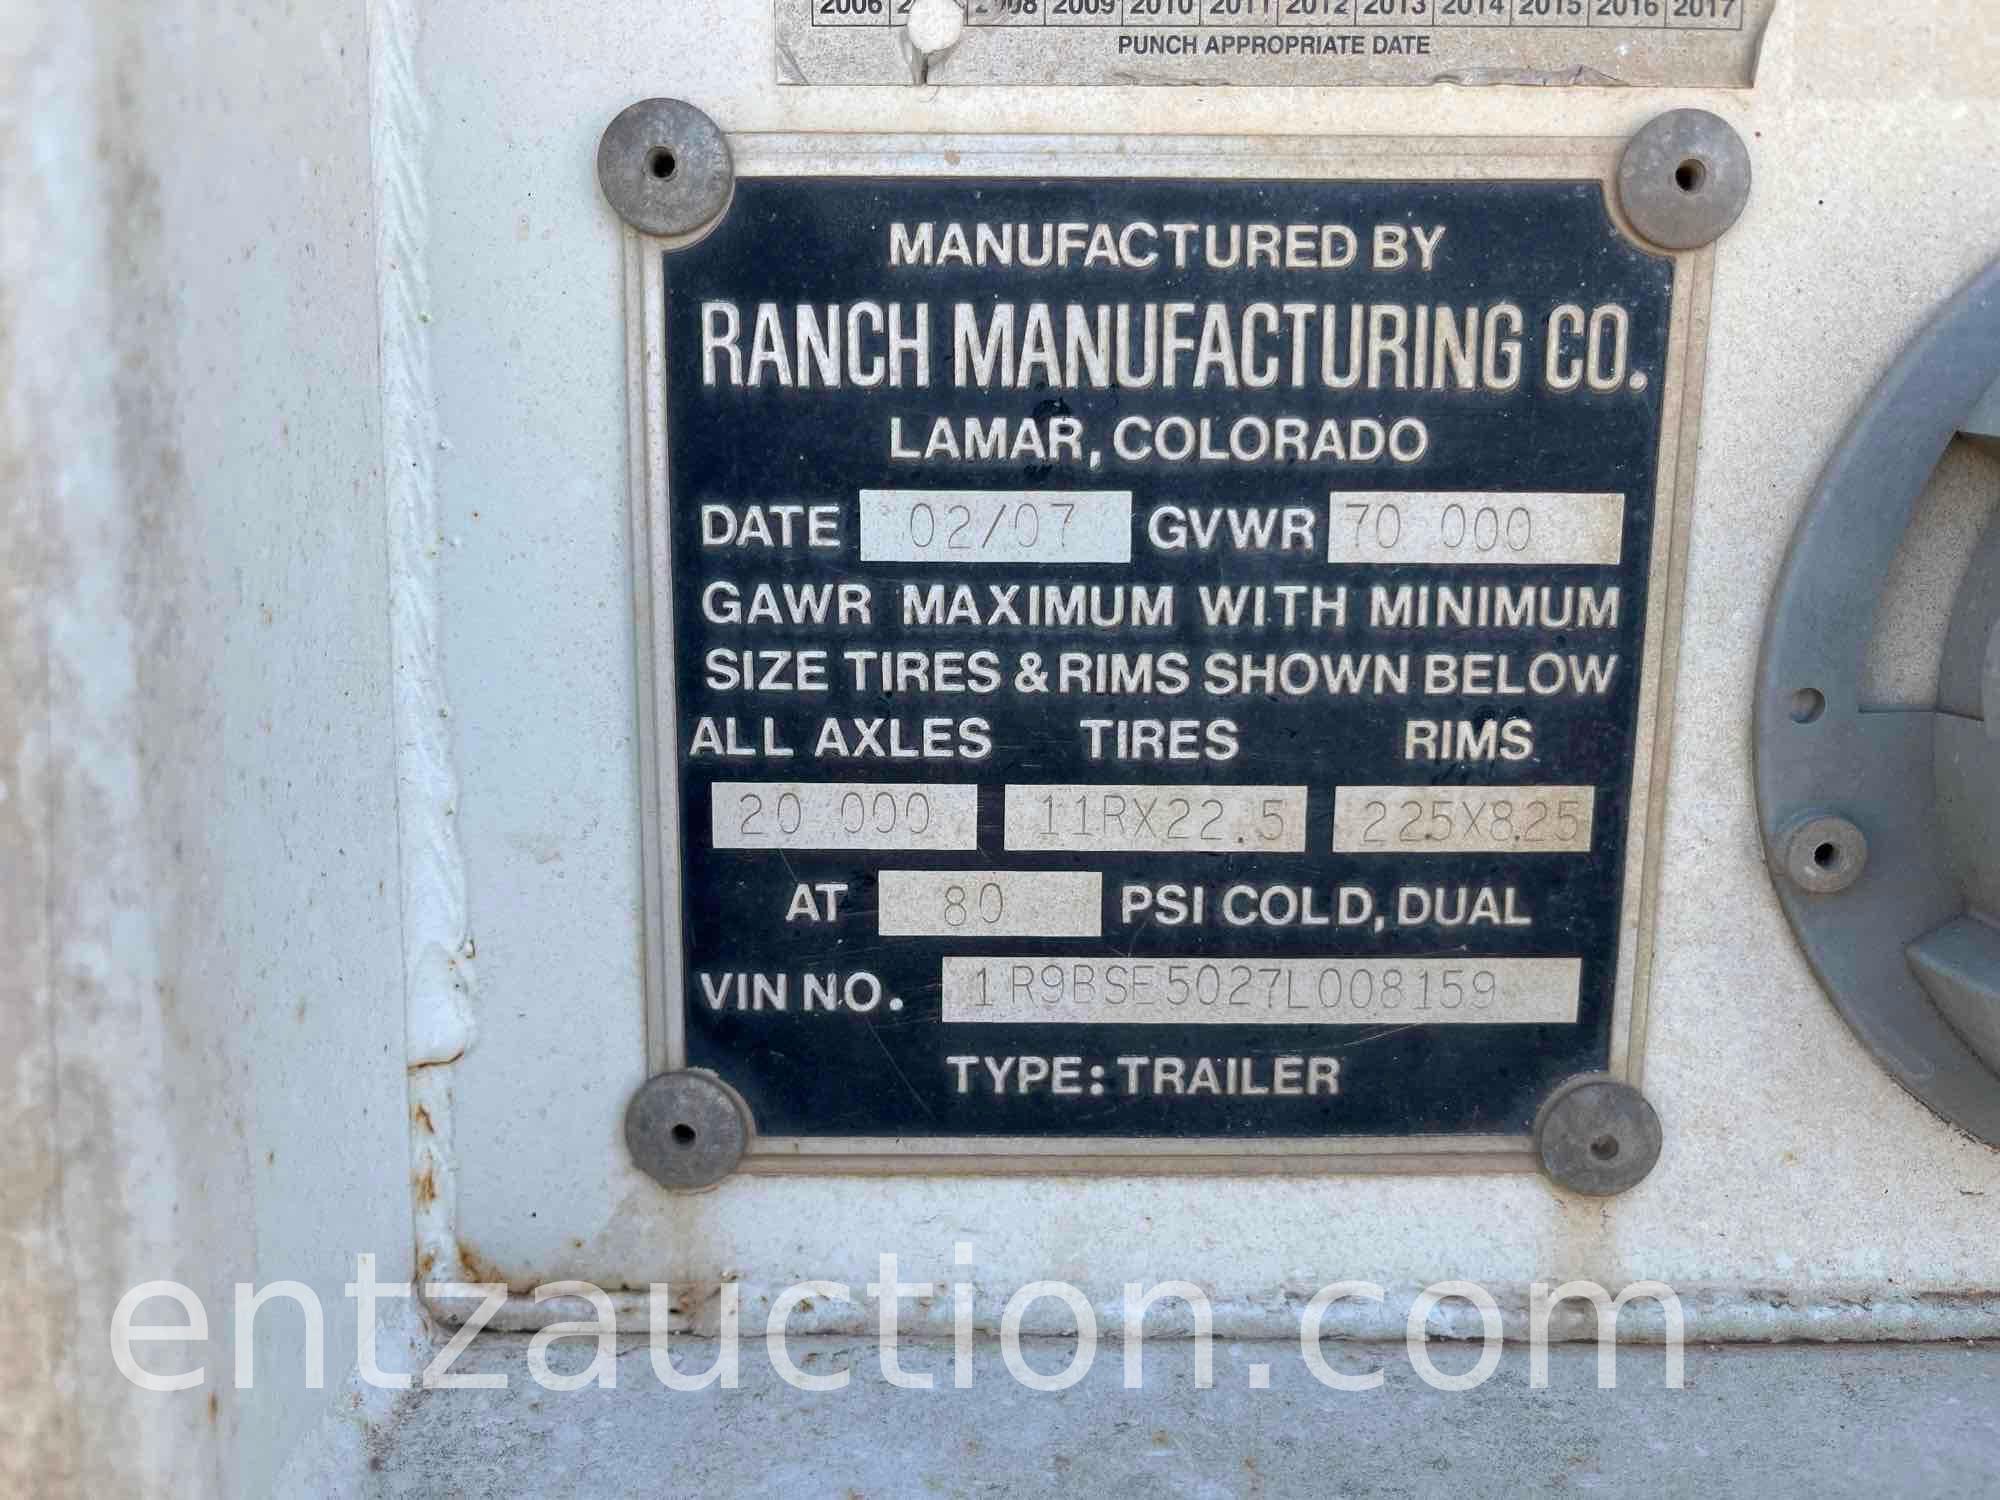 2007 RANCH MANUFACTURING CO. BELLY DUMP,